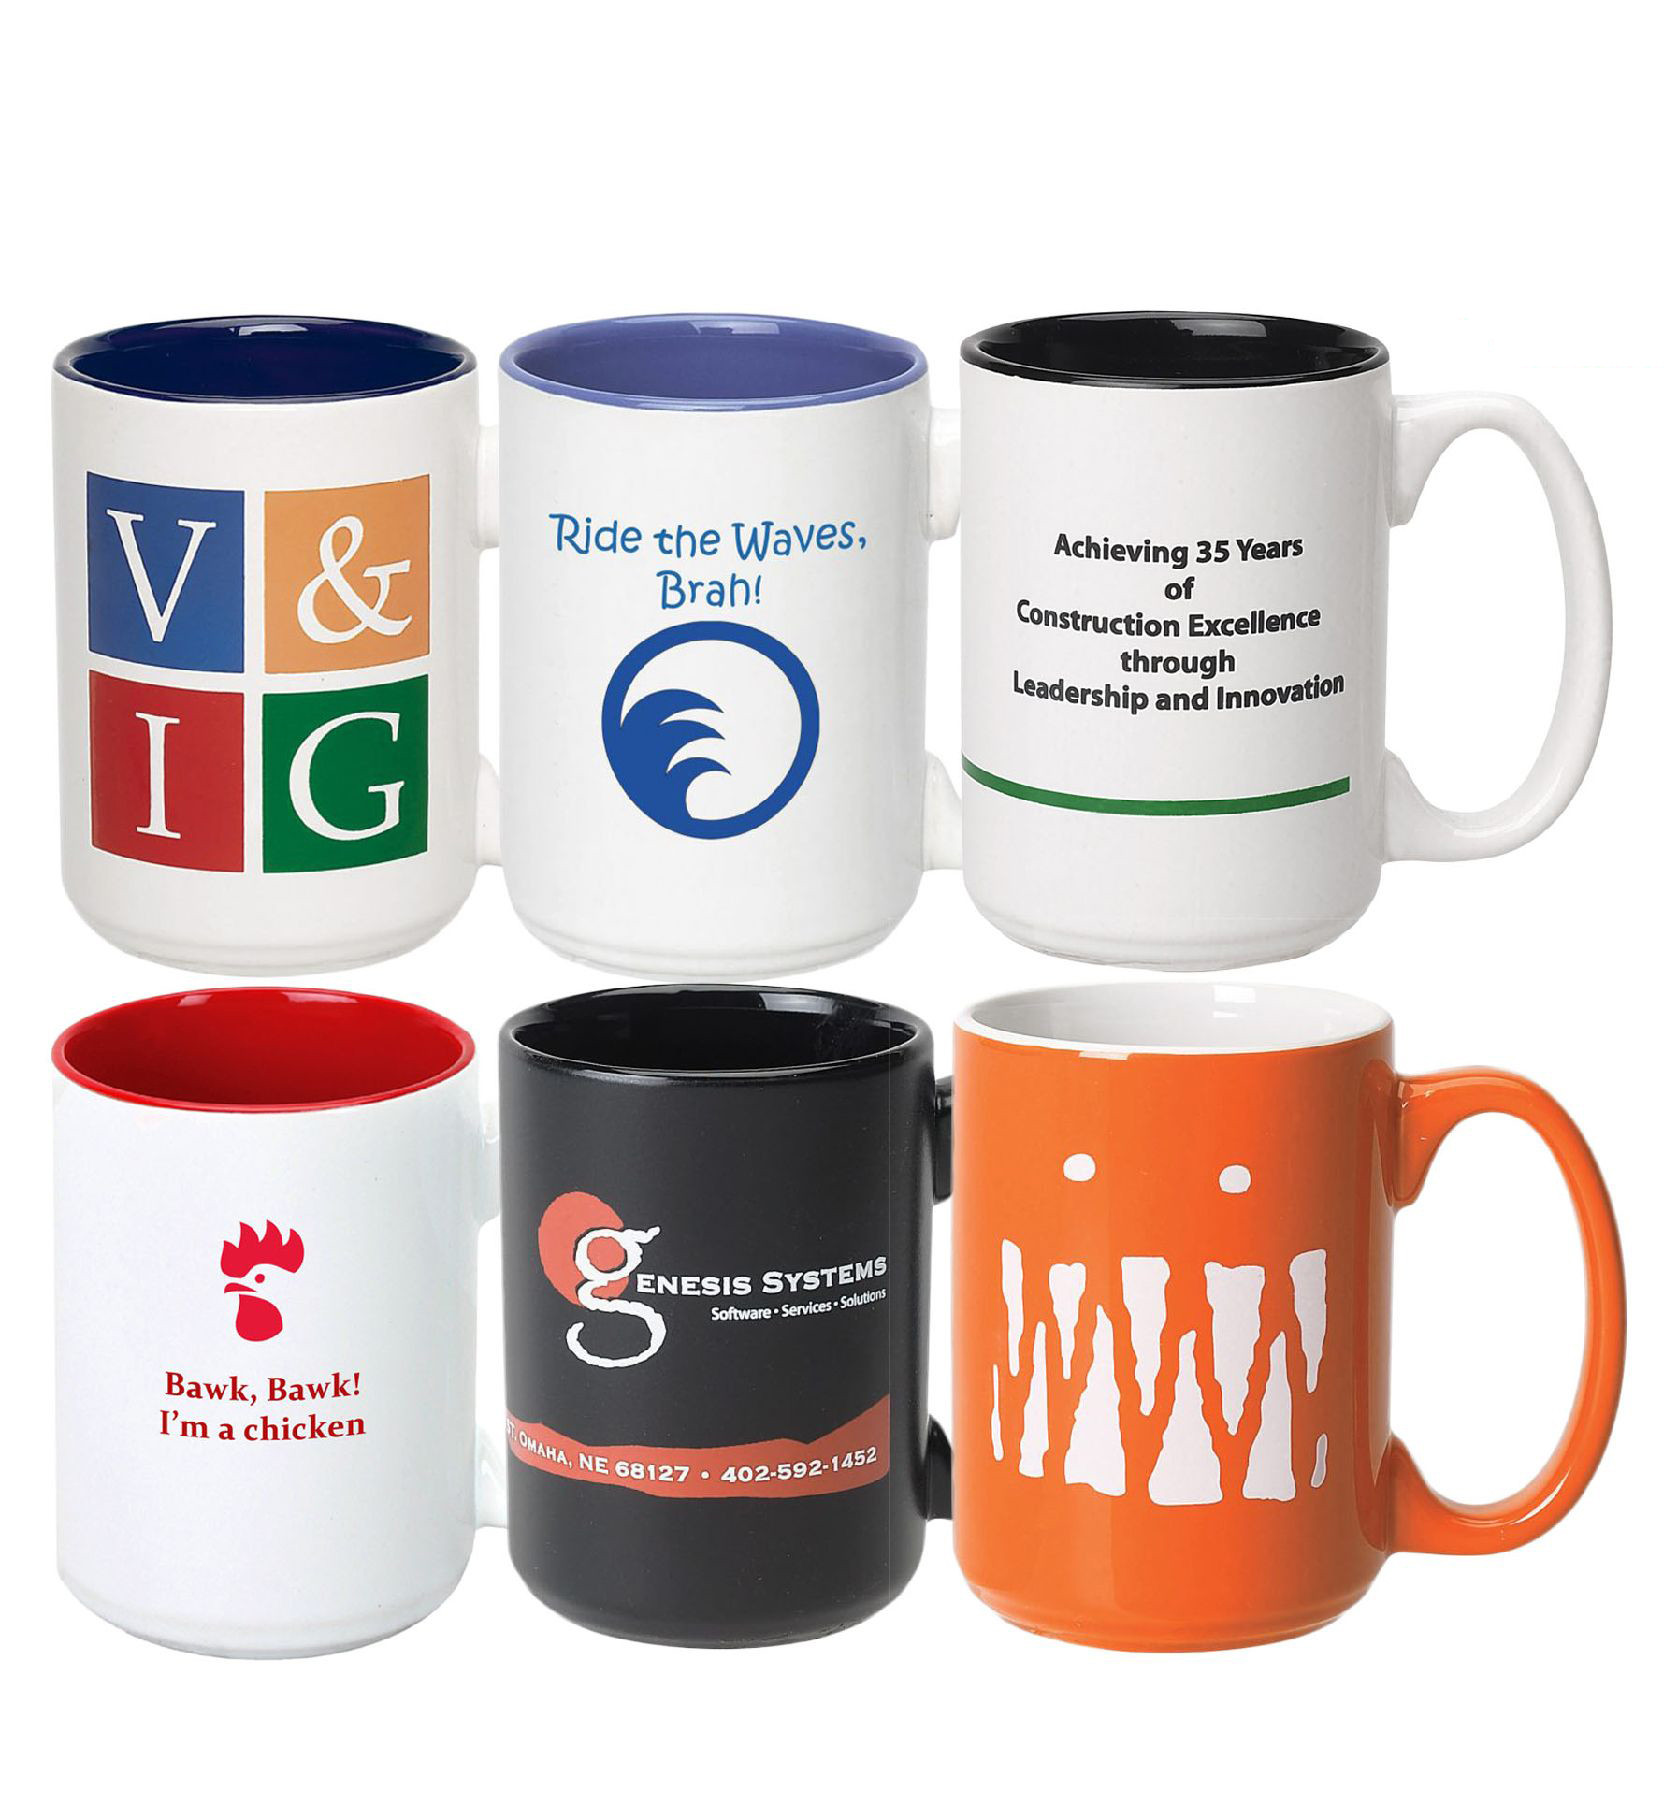 mugs as promotional products